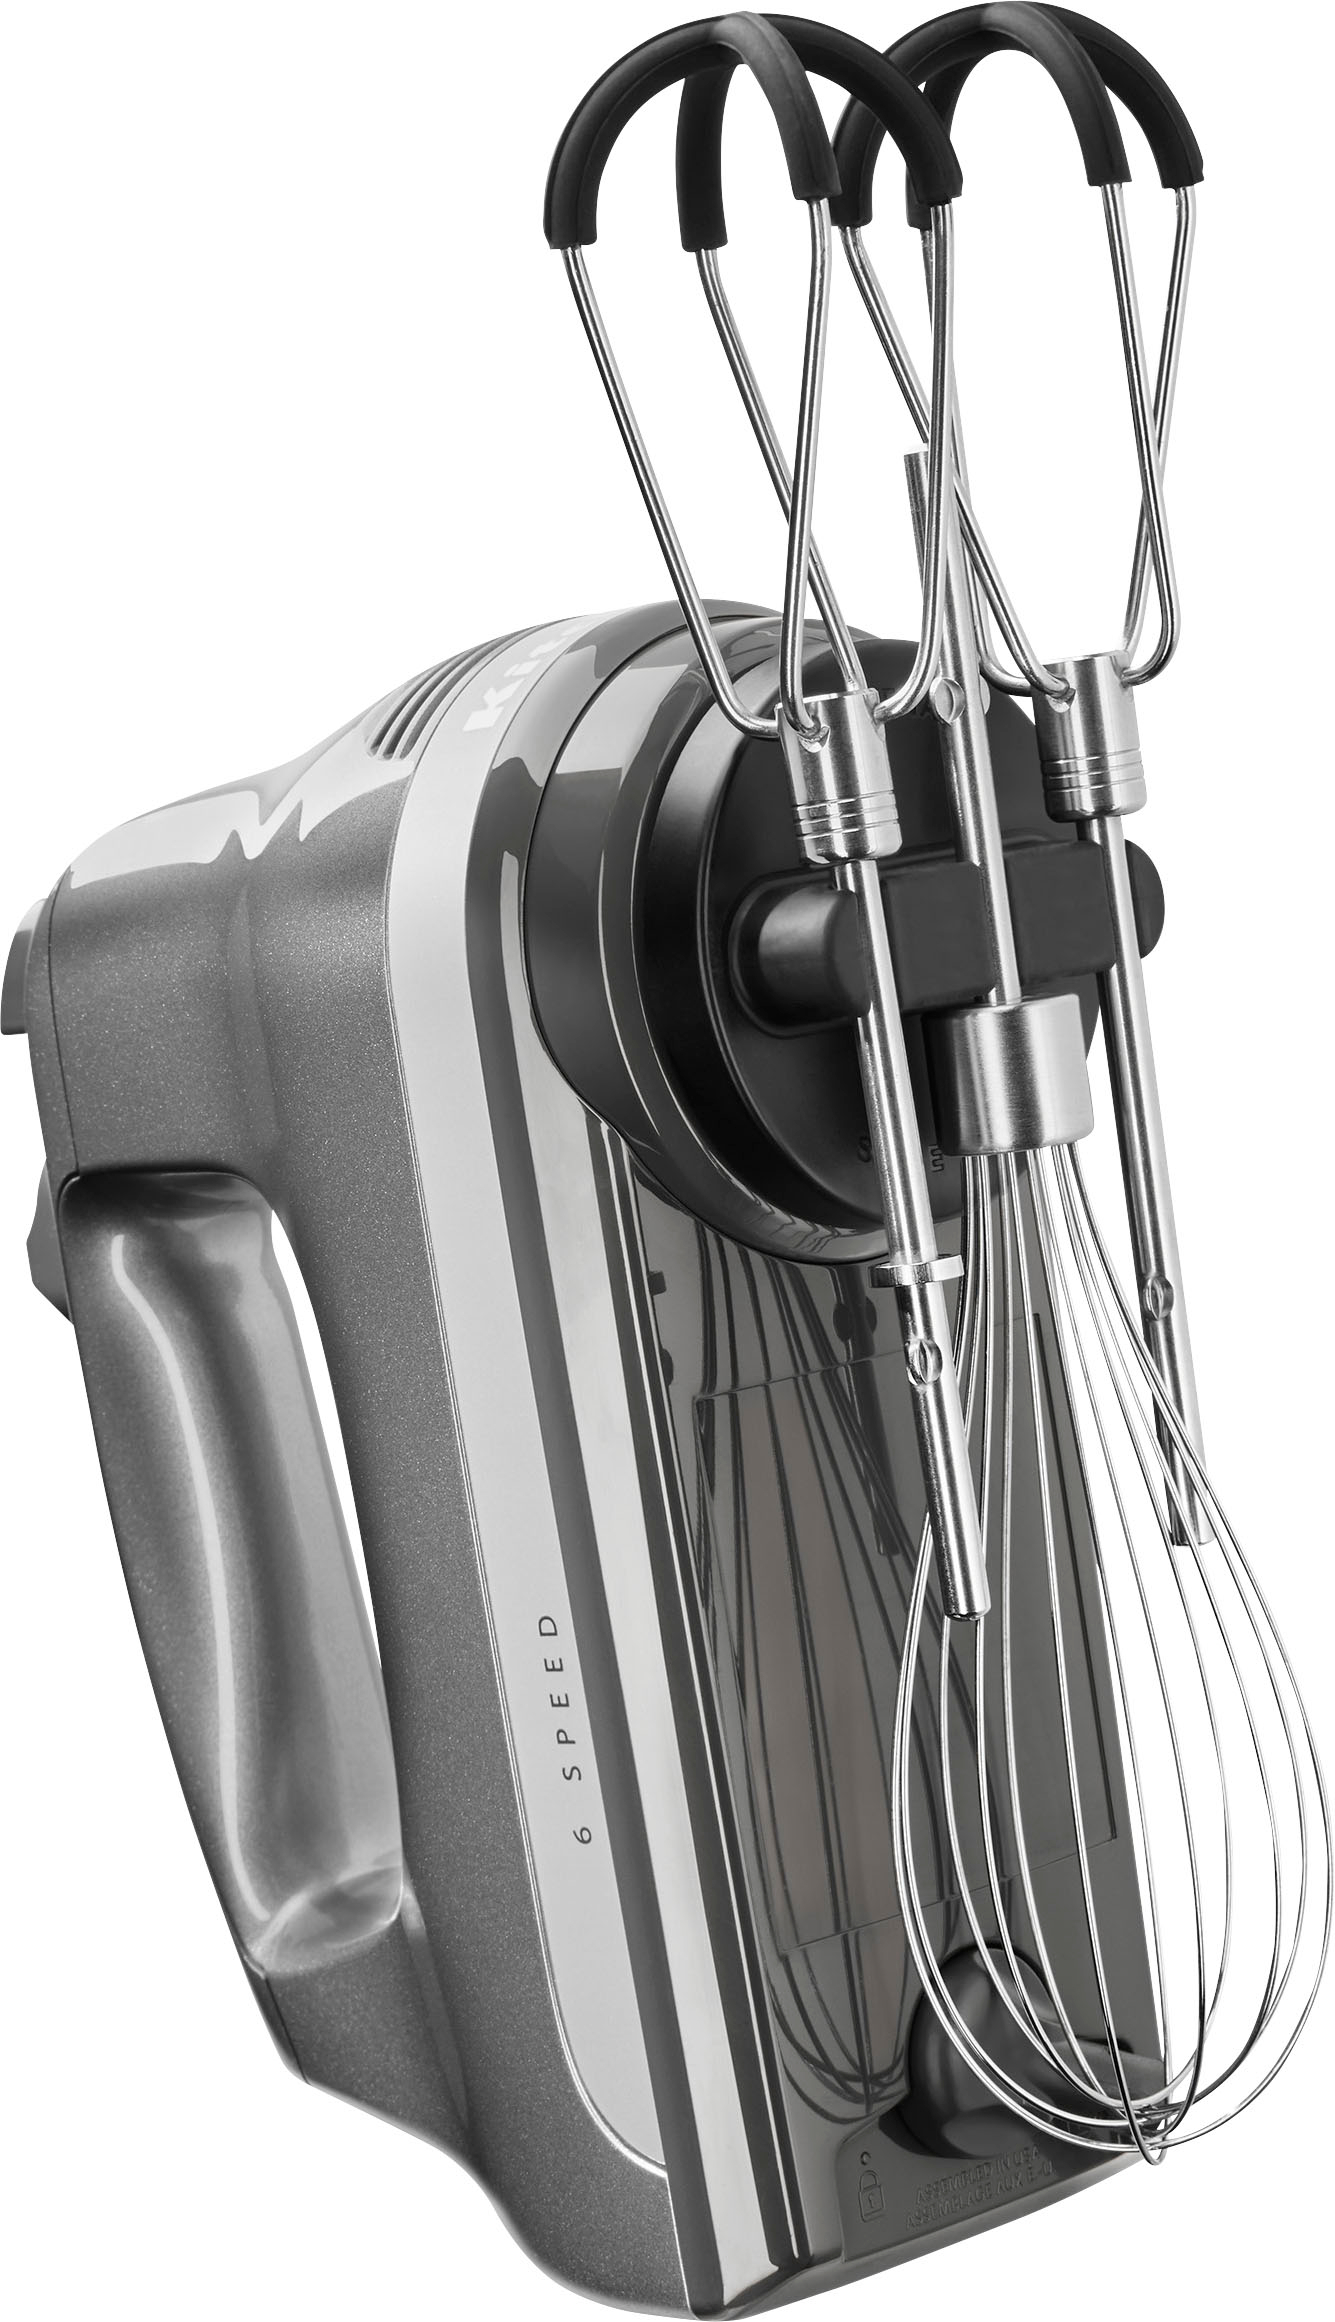 KitchenAid® 6 Speed Hand Mixer with Flex Edge Beaters & Reviews